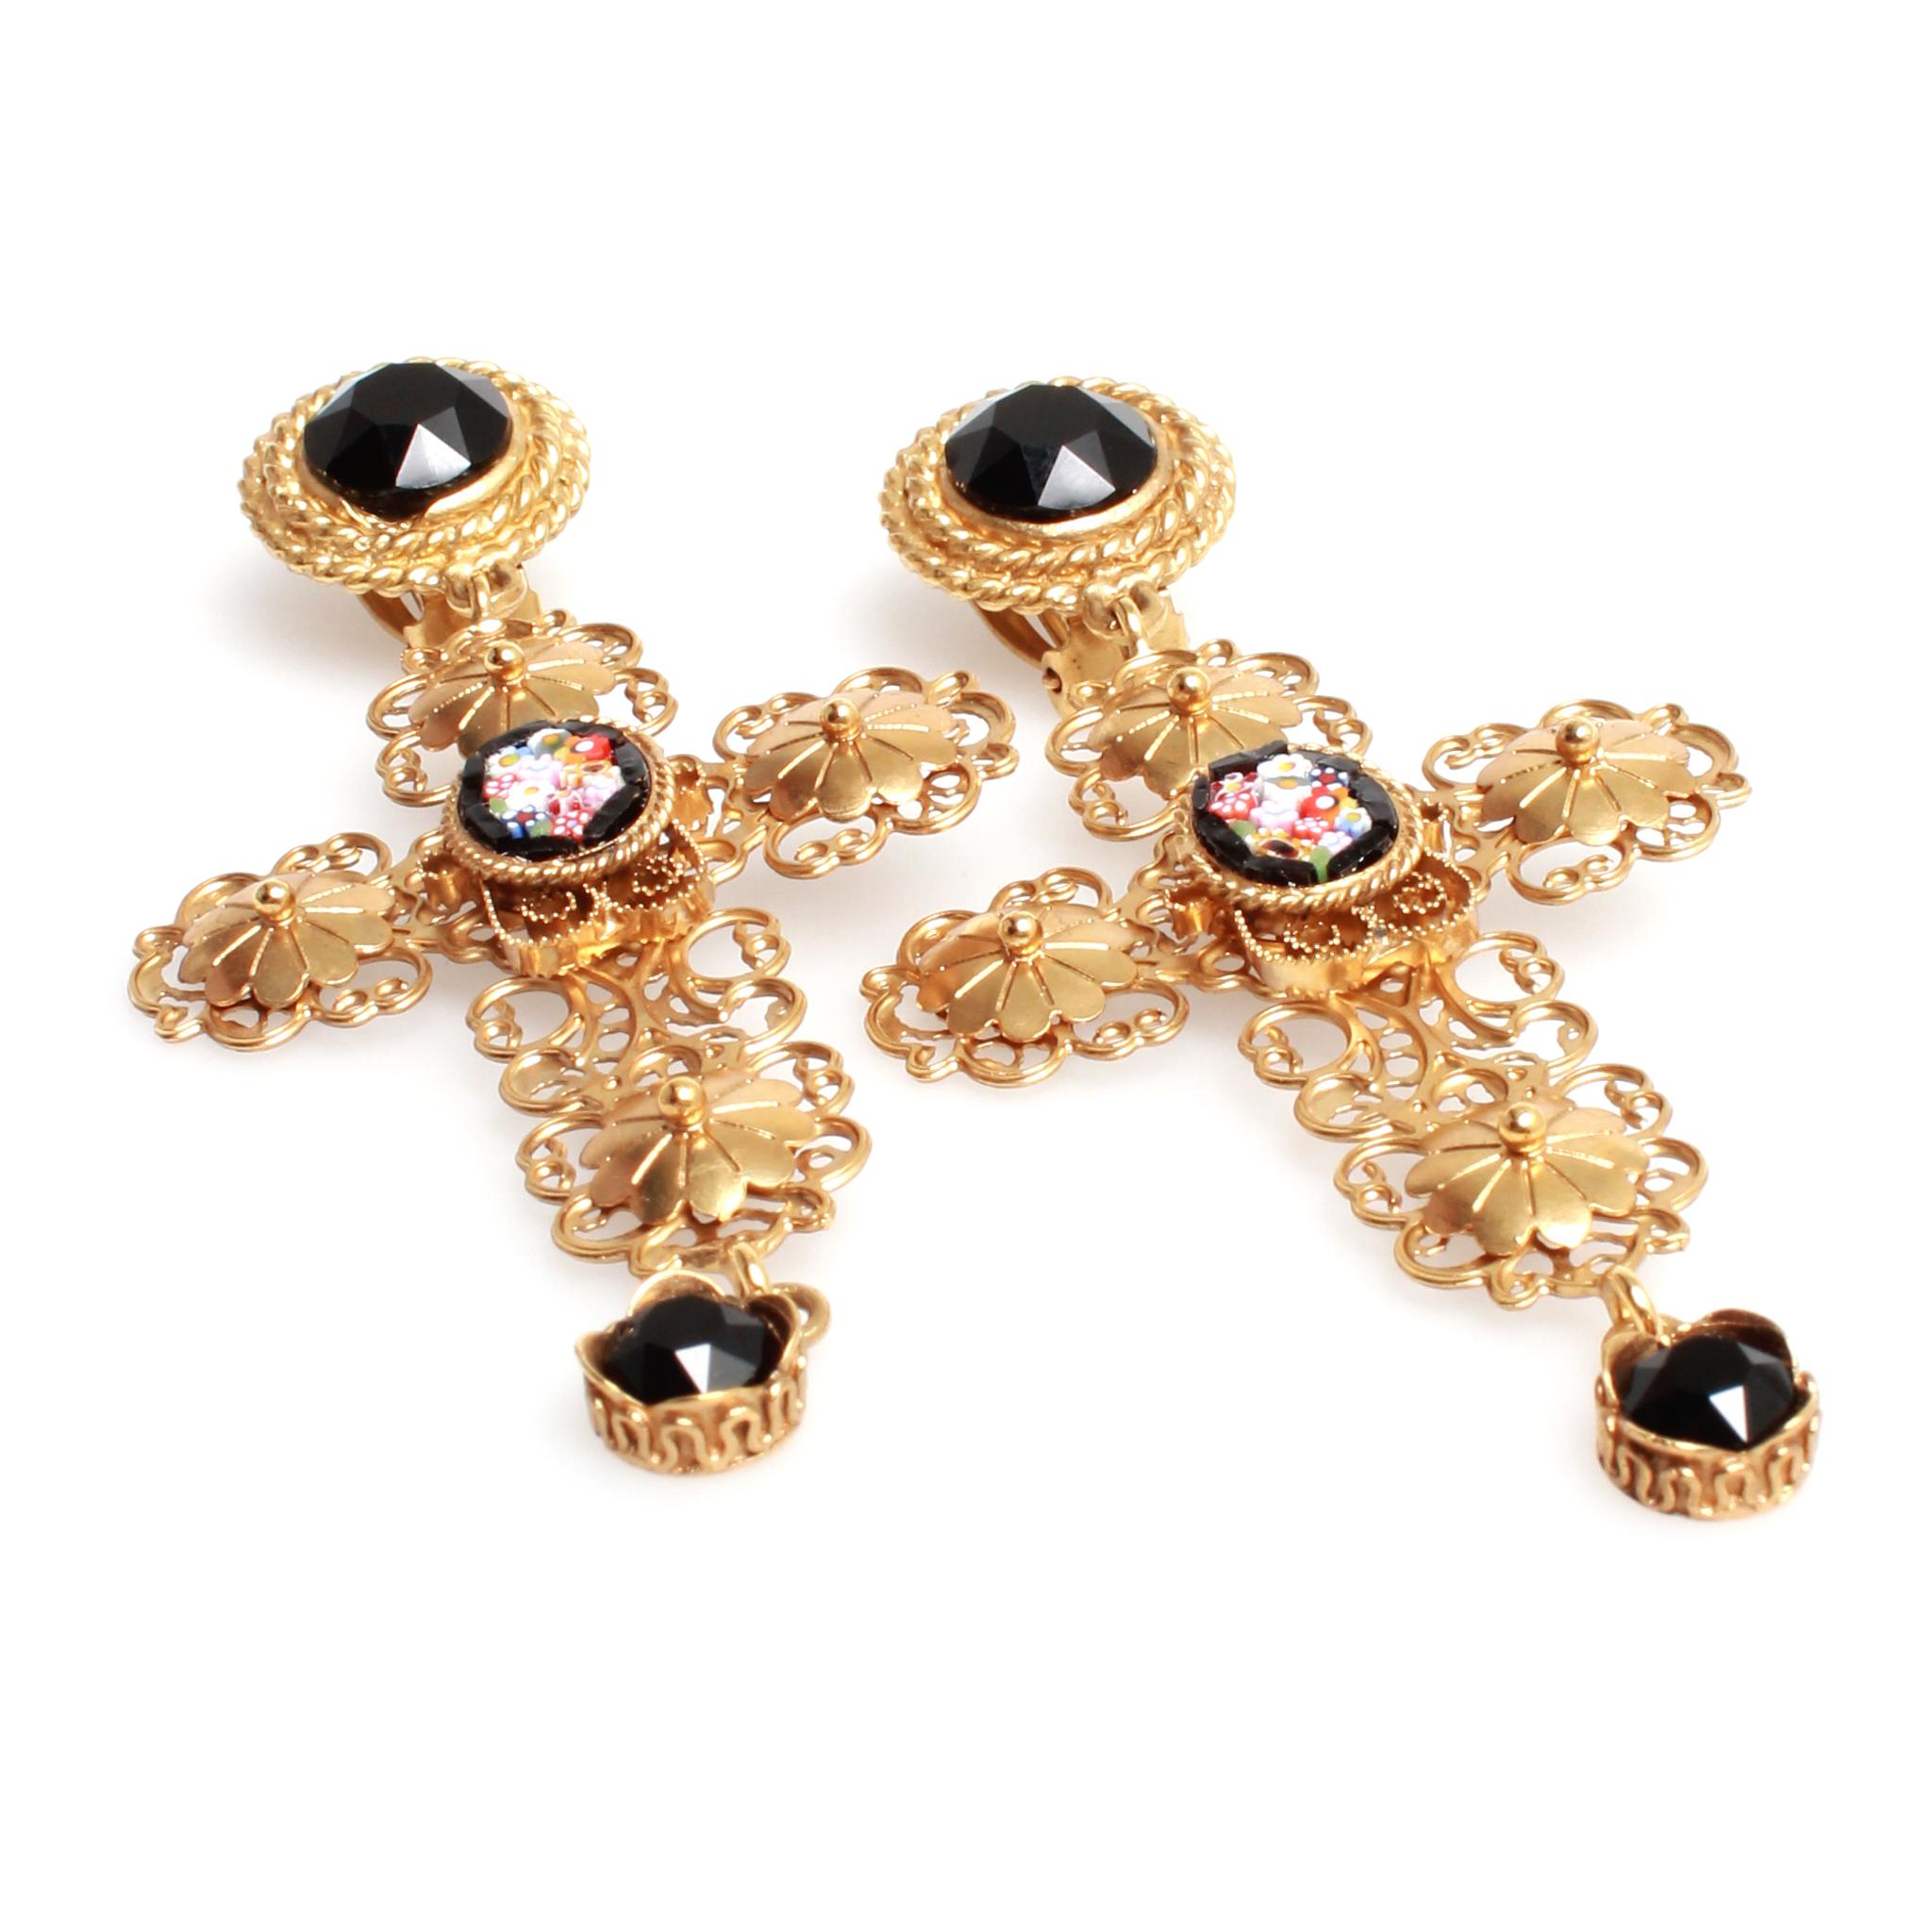 Heavenly gold toned Dolce and Gabbana cameo cross clip on earrings featuring black cut glass detailing and floral cameo center. Super light weight!
